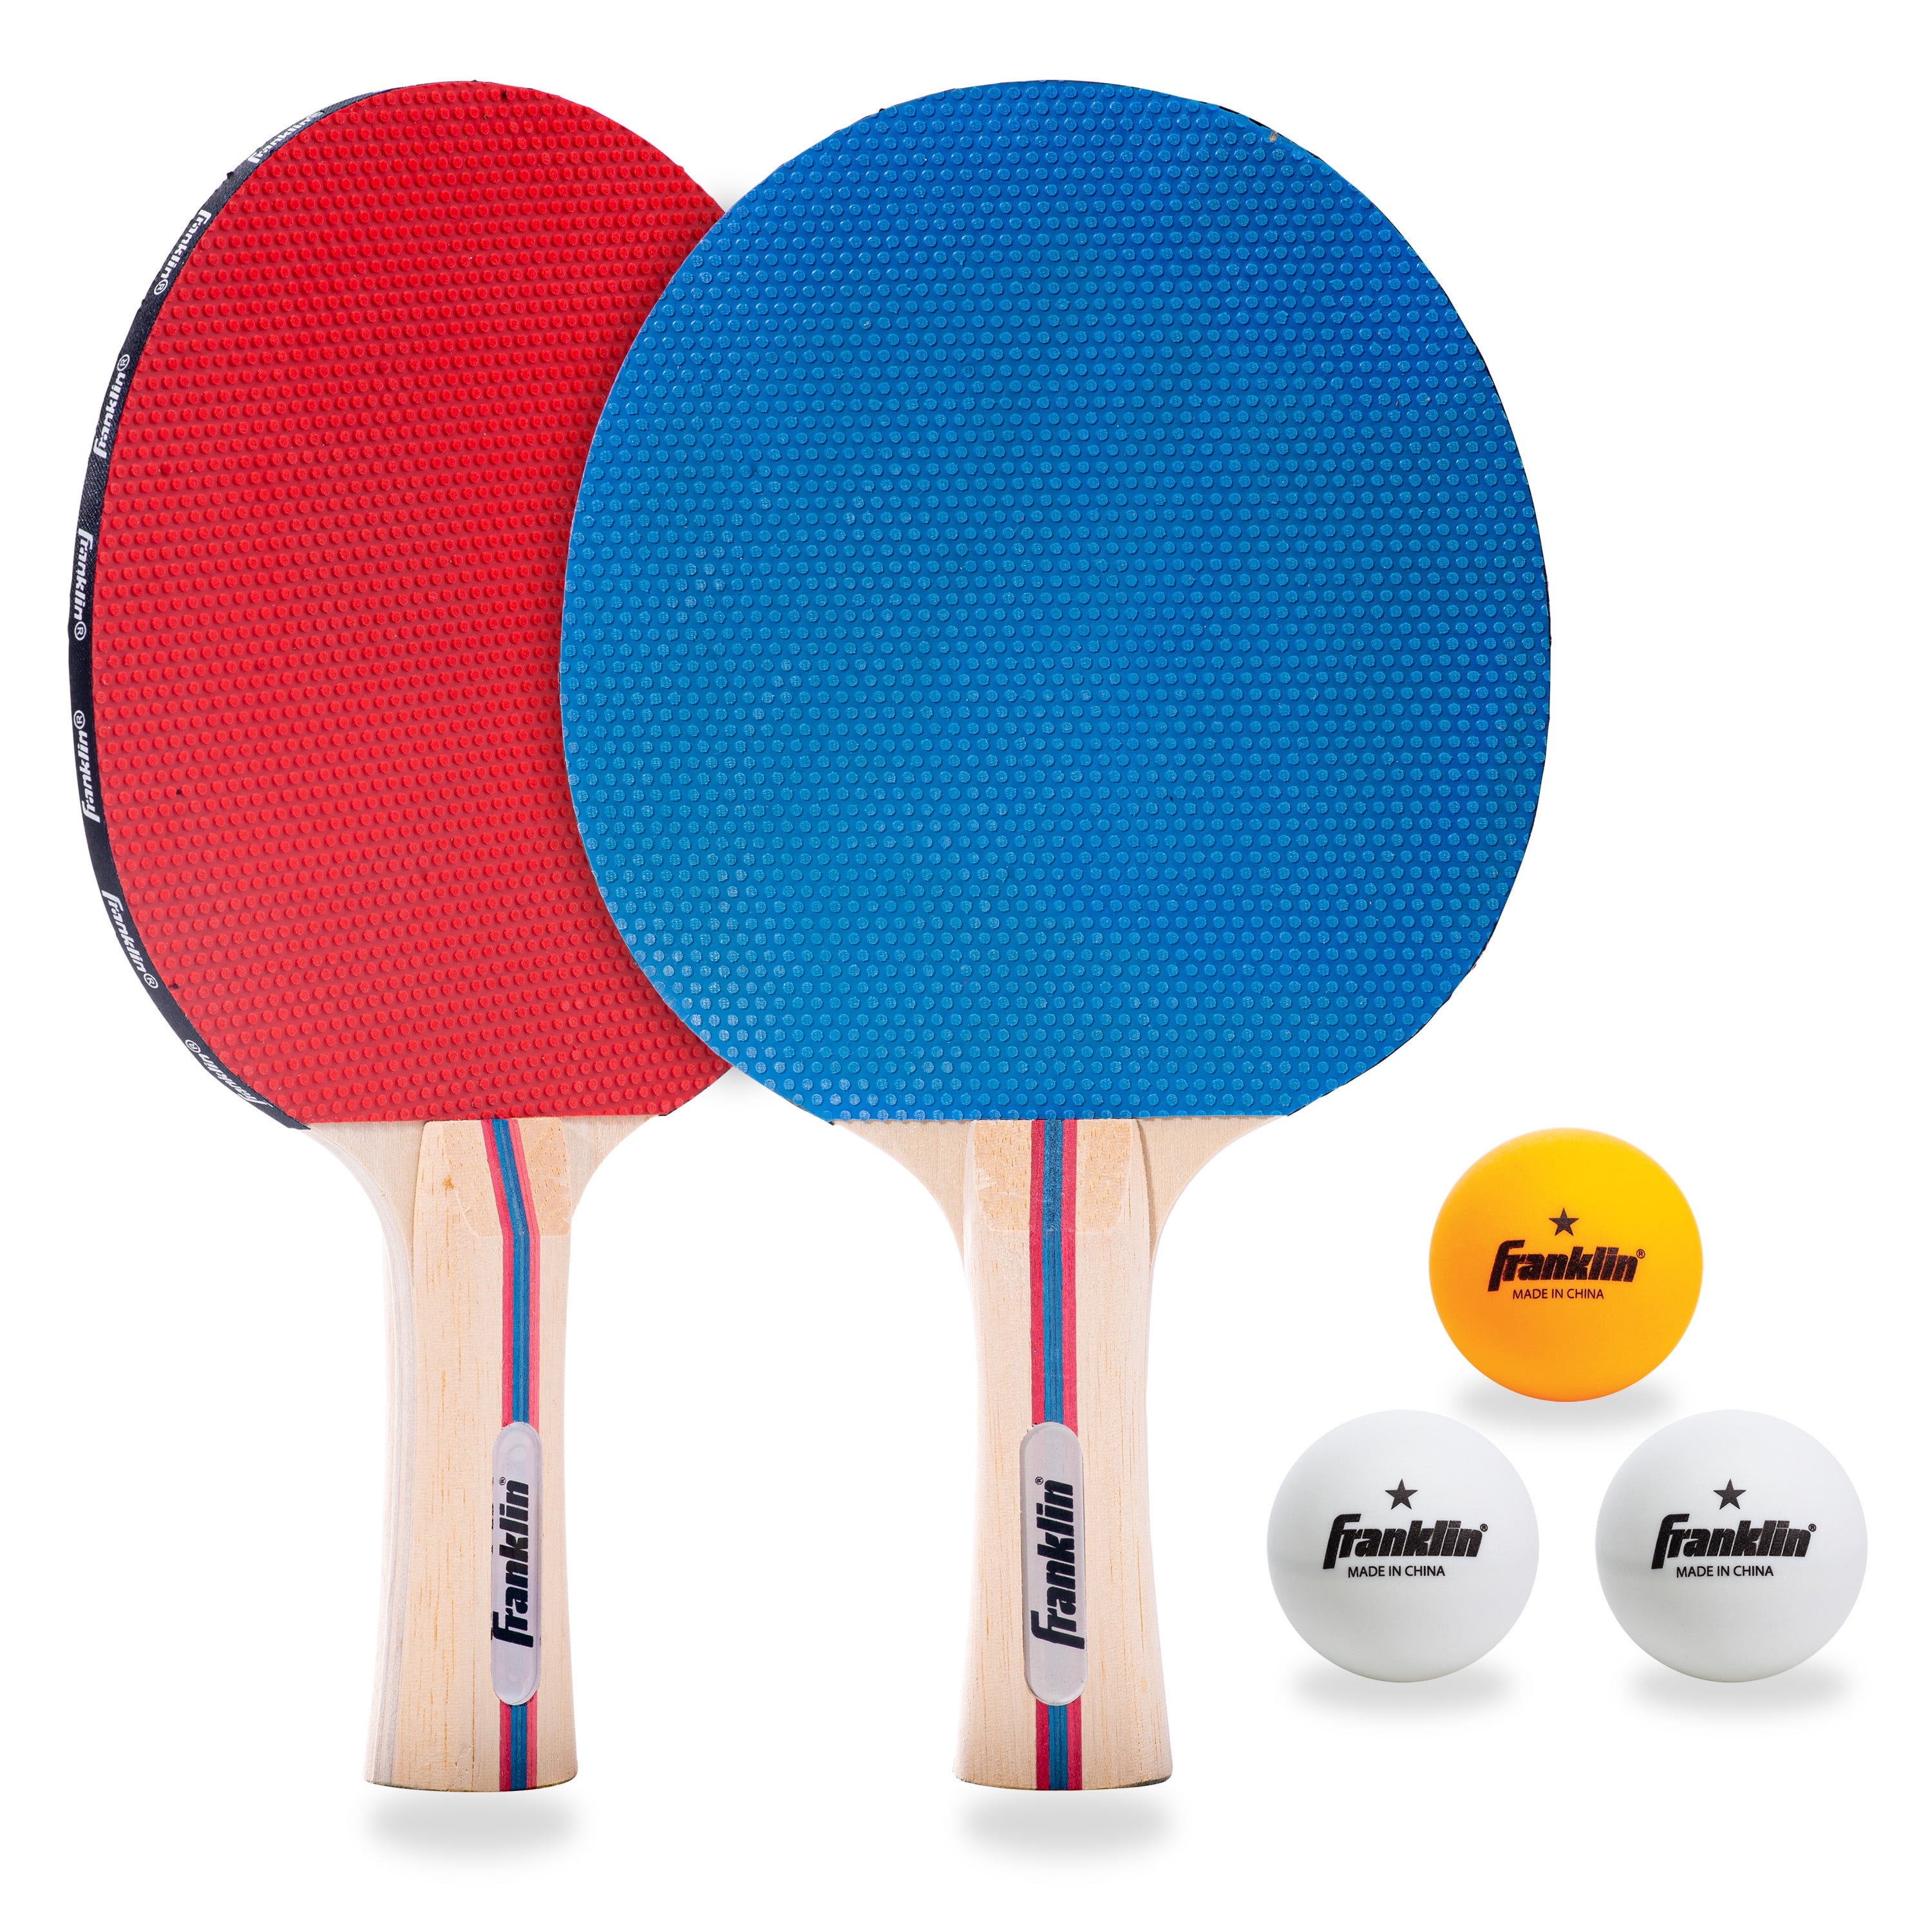 All-in-one Ping Pong Set 3 balls for Indoor Games Table Tennis Net 2 paddle 